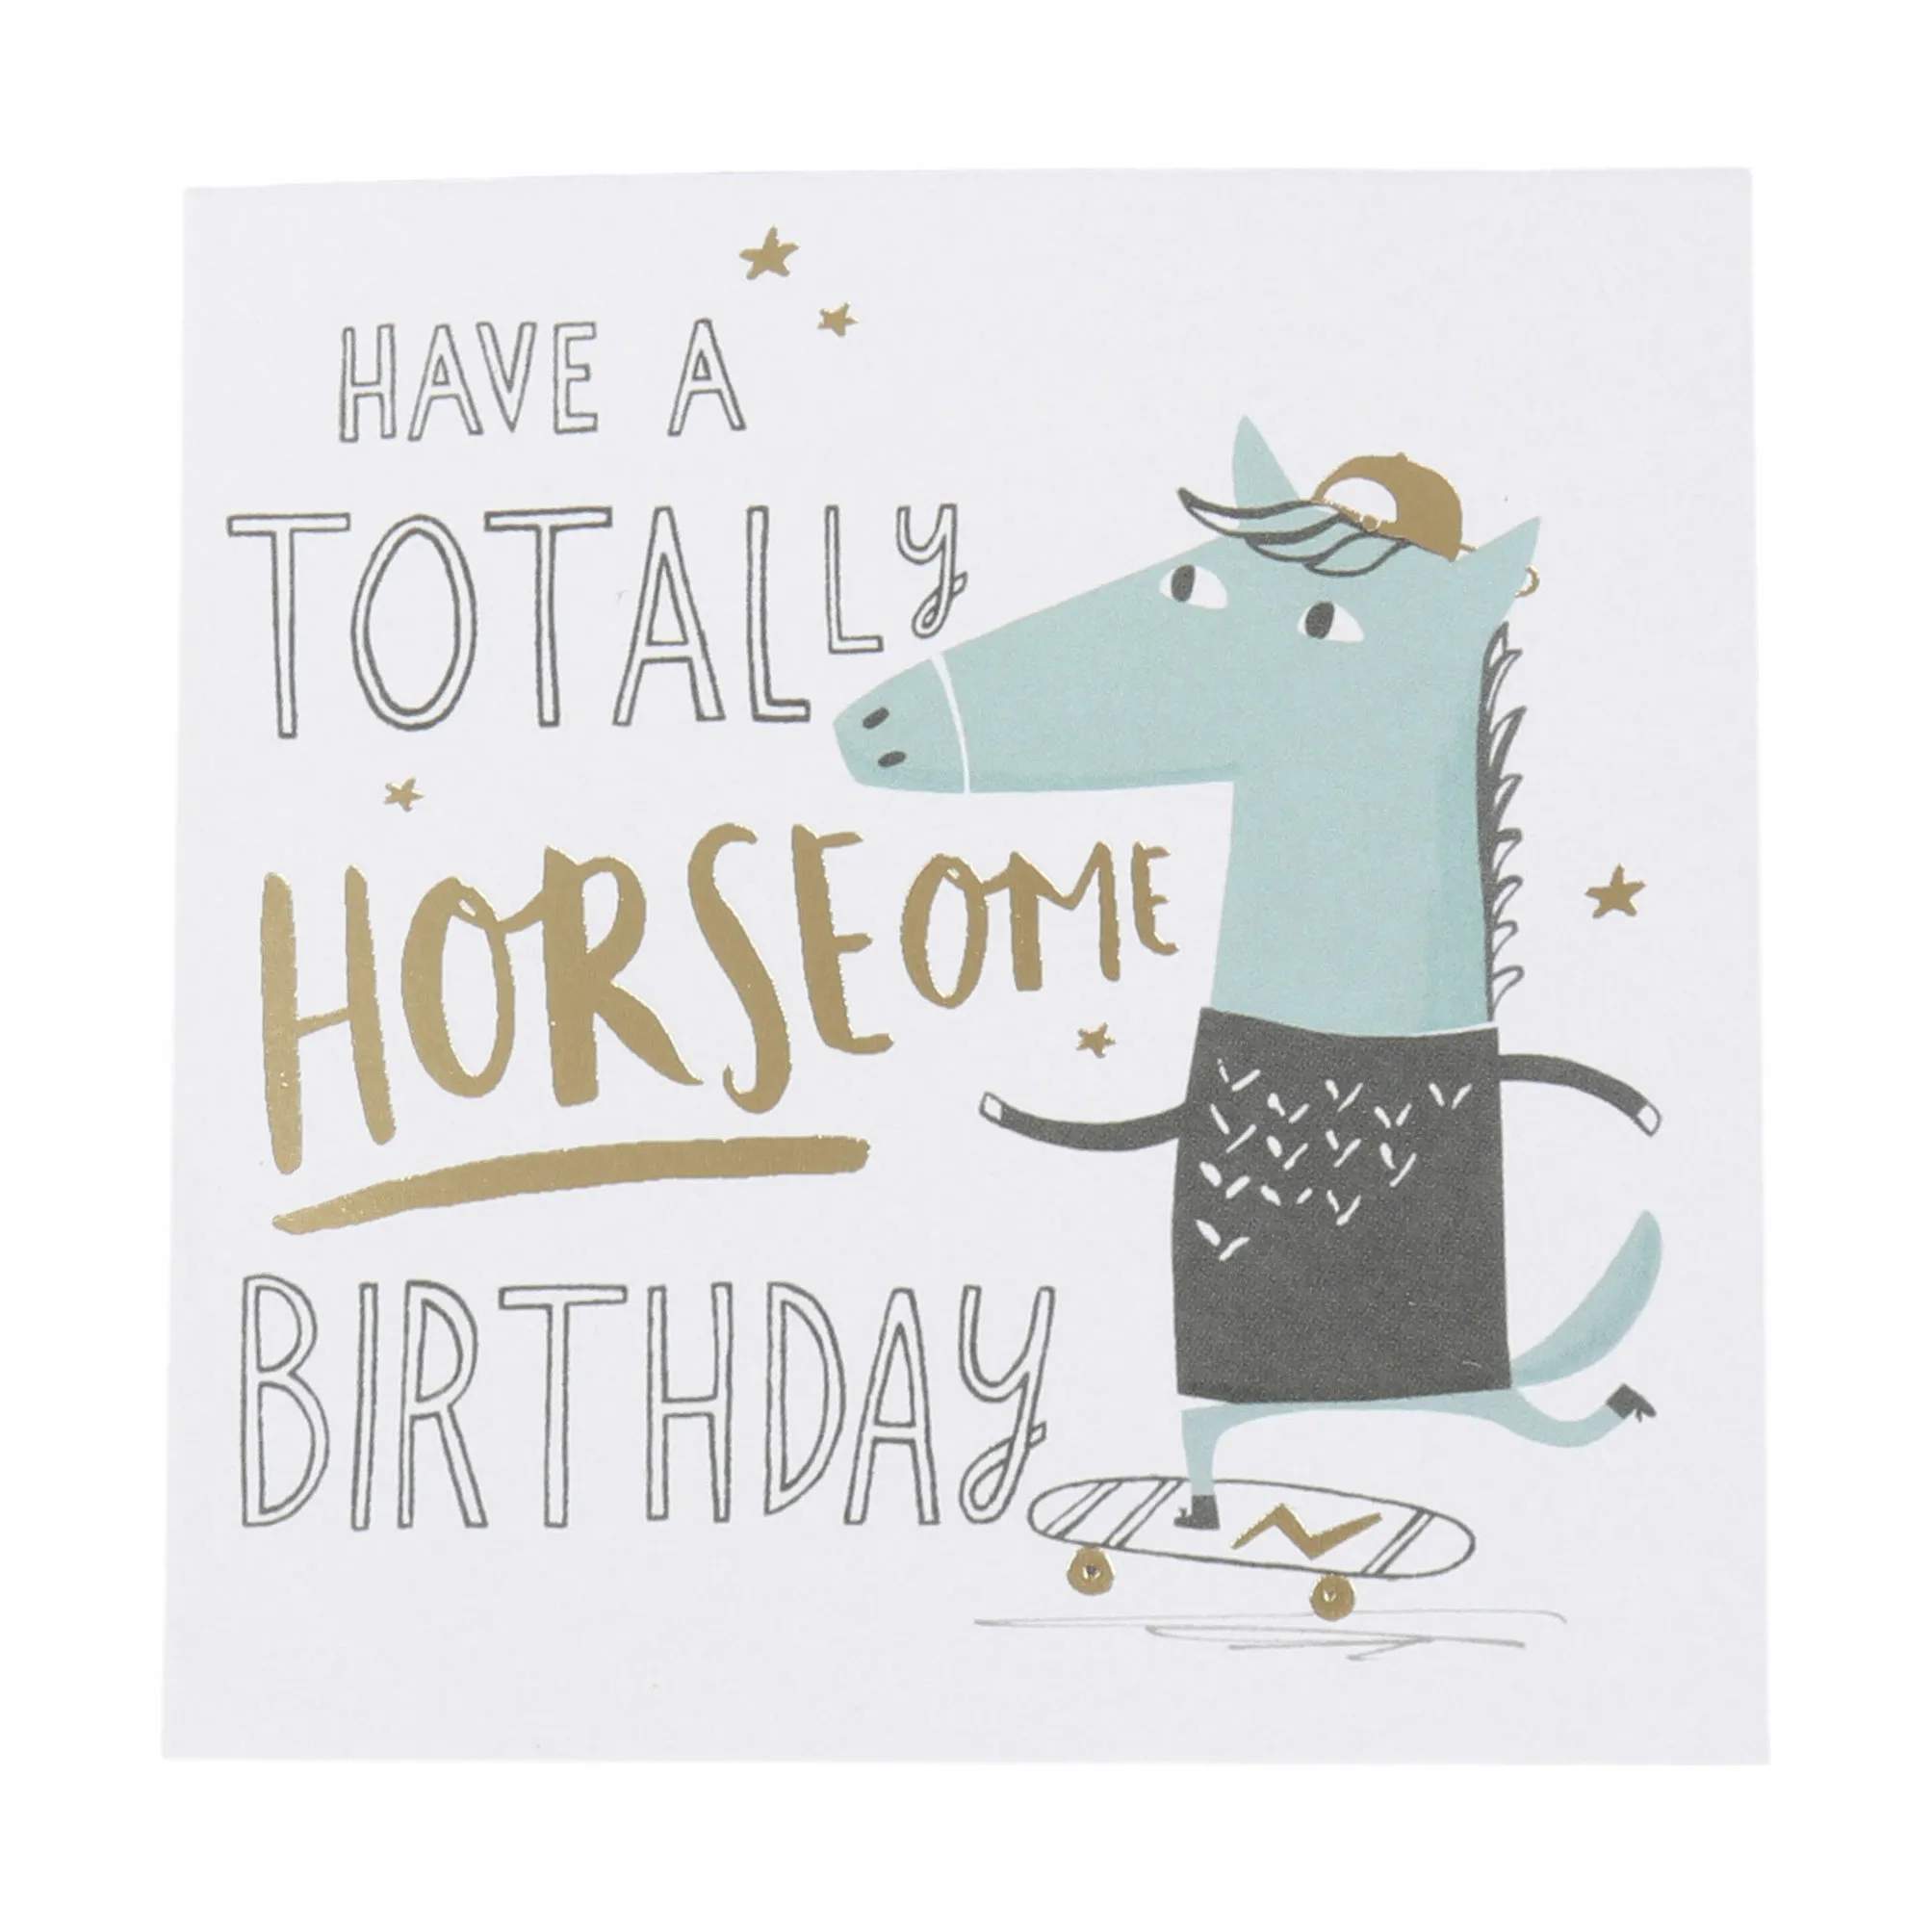 Kort - Have a totally horseome birthday